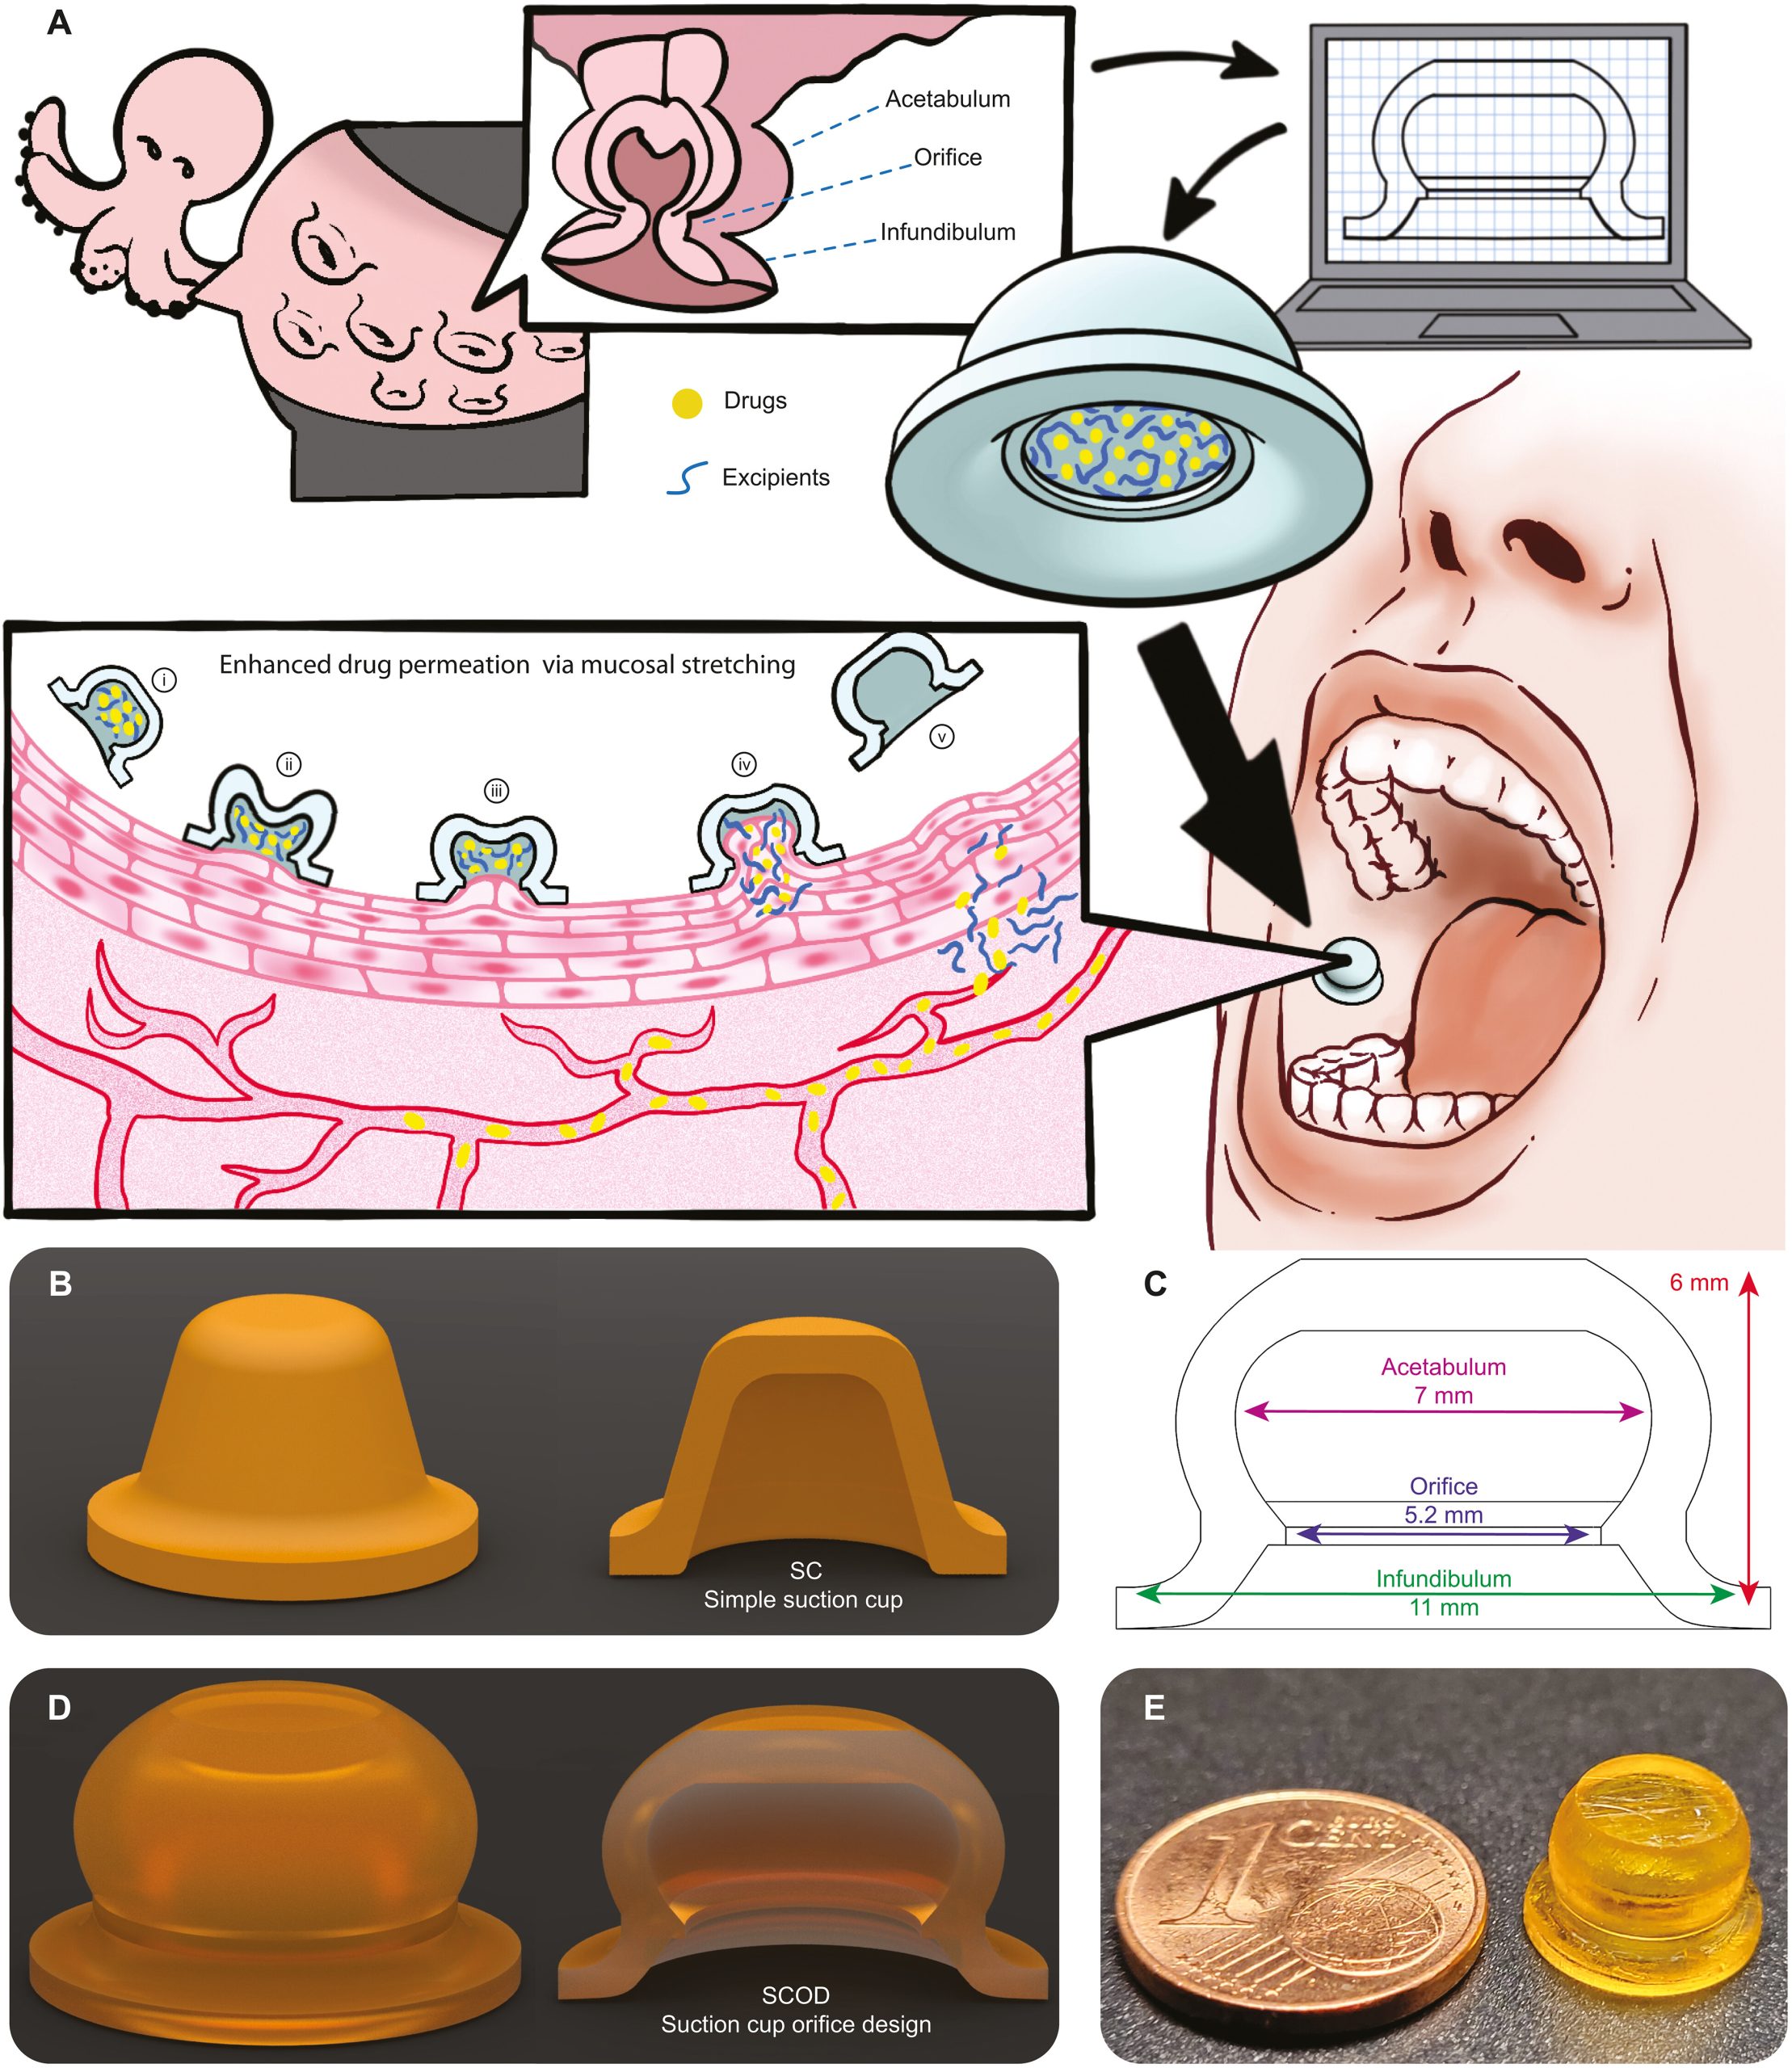 Boosting systemic absorption of peptides with a bioinspired buccal-stretching patch